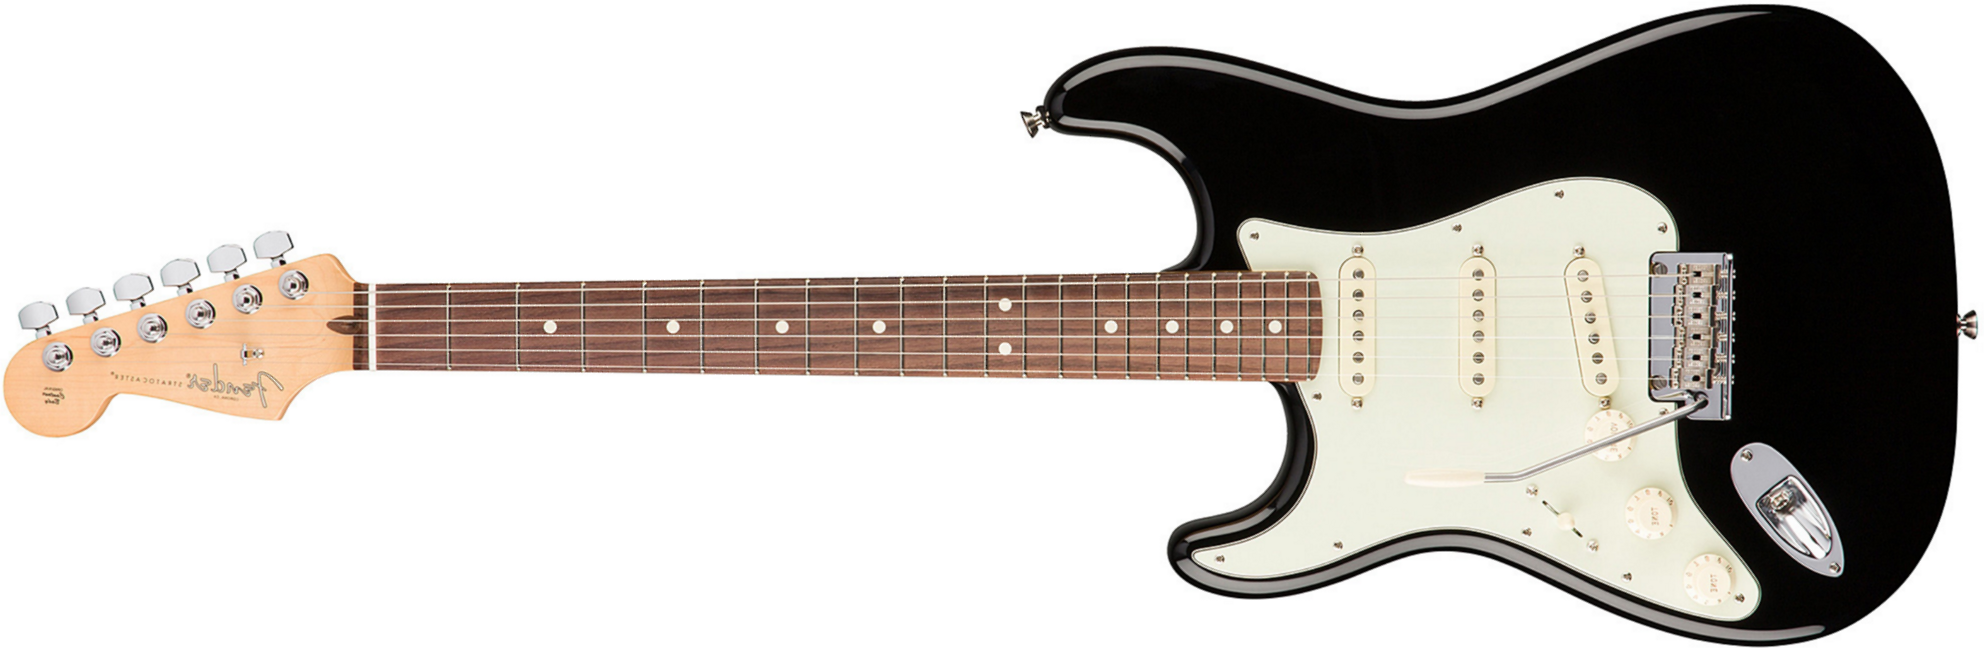 Fender Strat American Professional Lh Usa Gaucher 3s Rw - Black - Left-handed electric guitar - Main picture